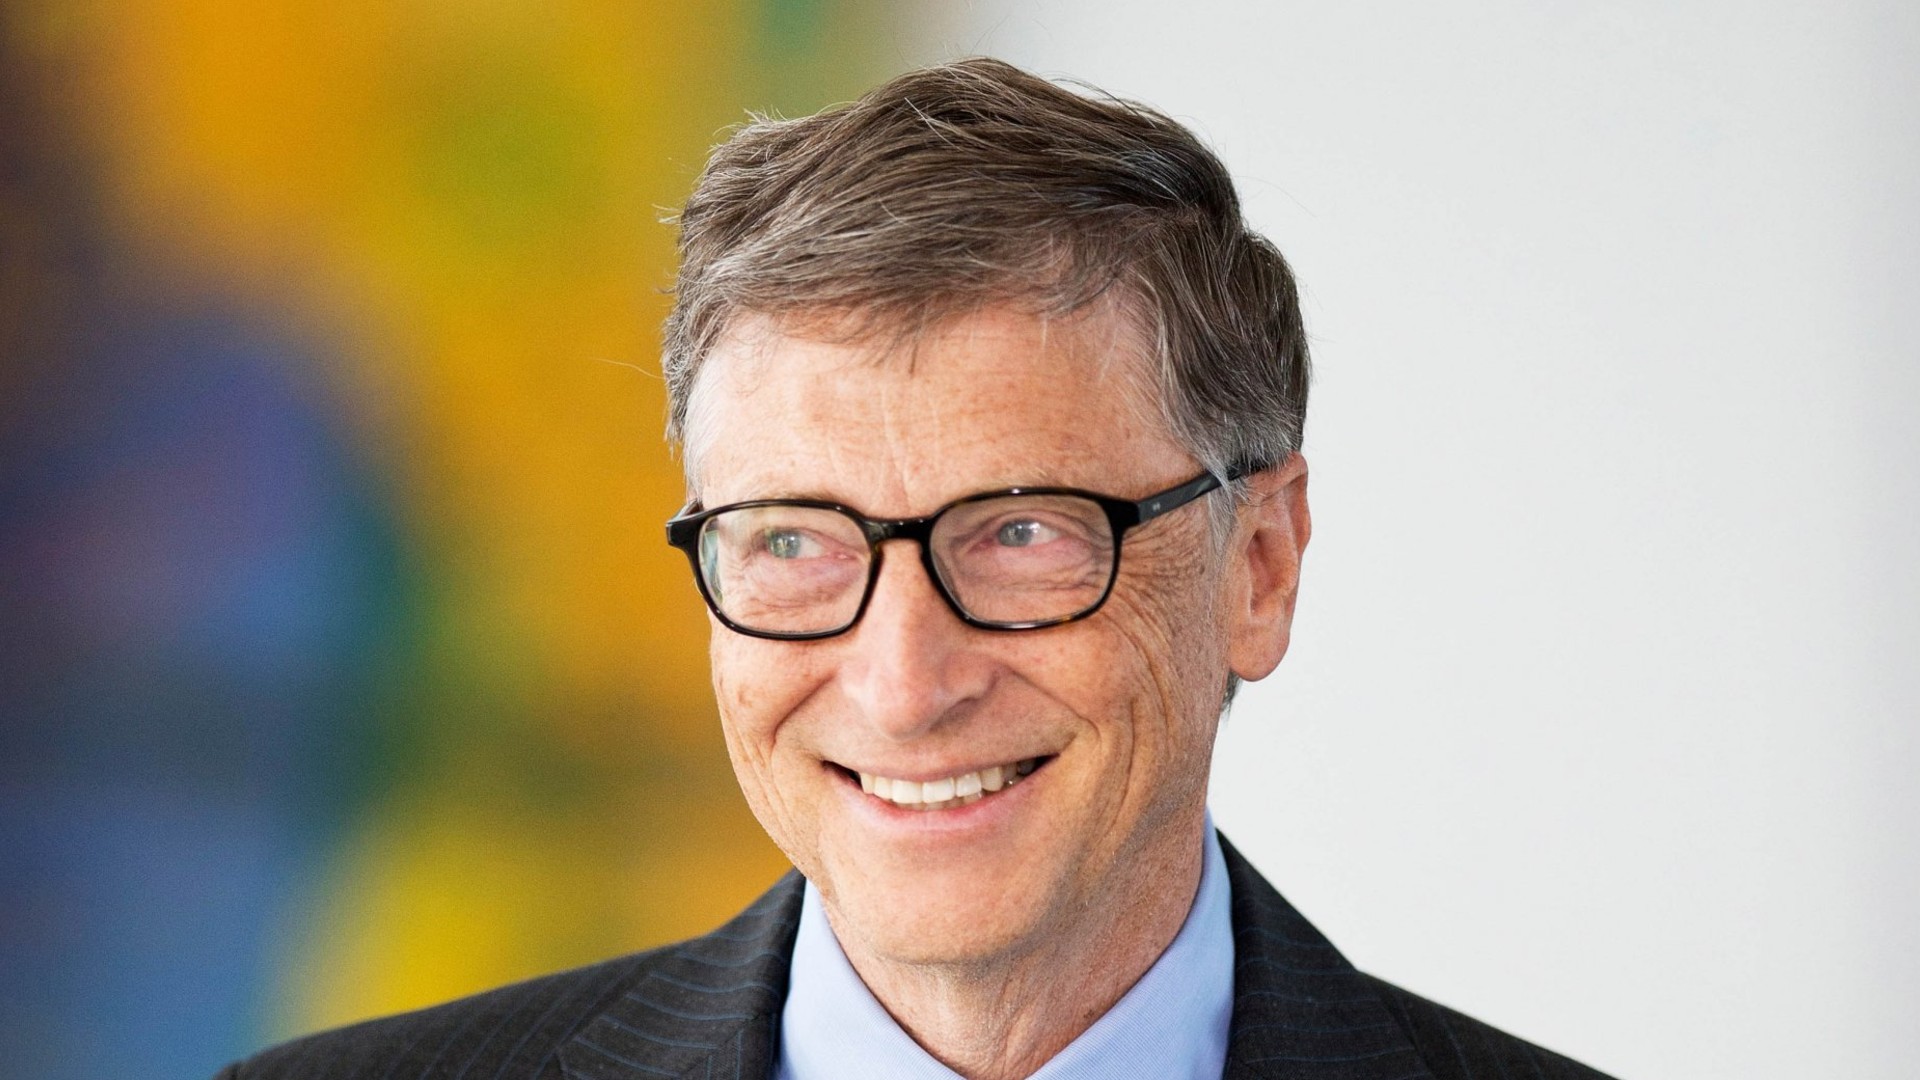 In ‘How to Avoid a Climate Disaster’, Bill Gates bares plan to save the world